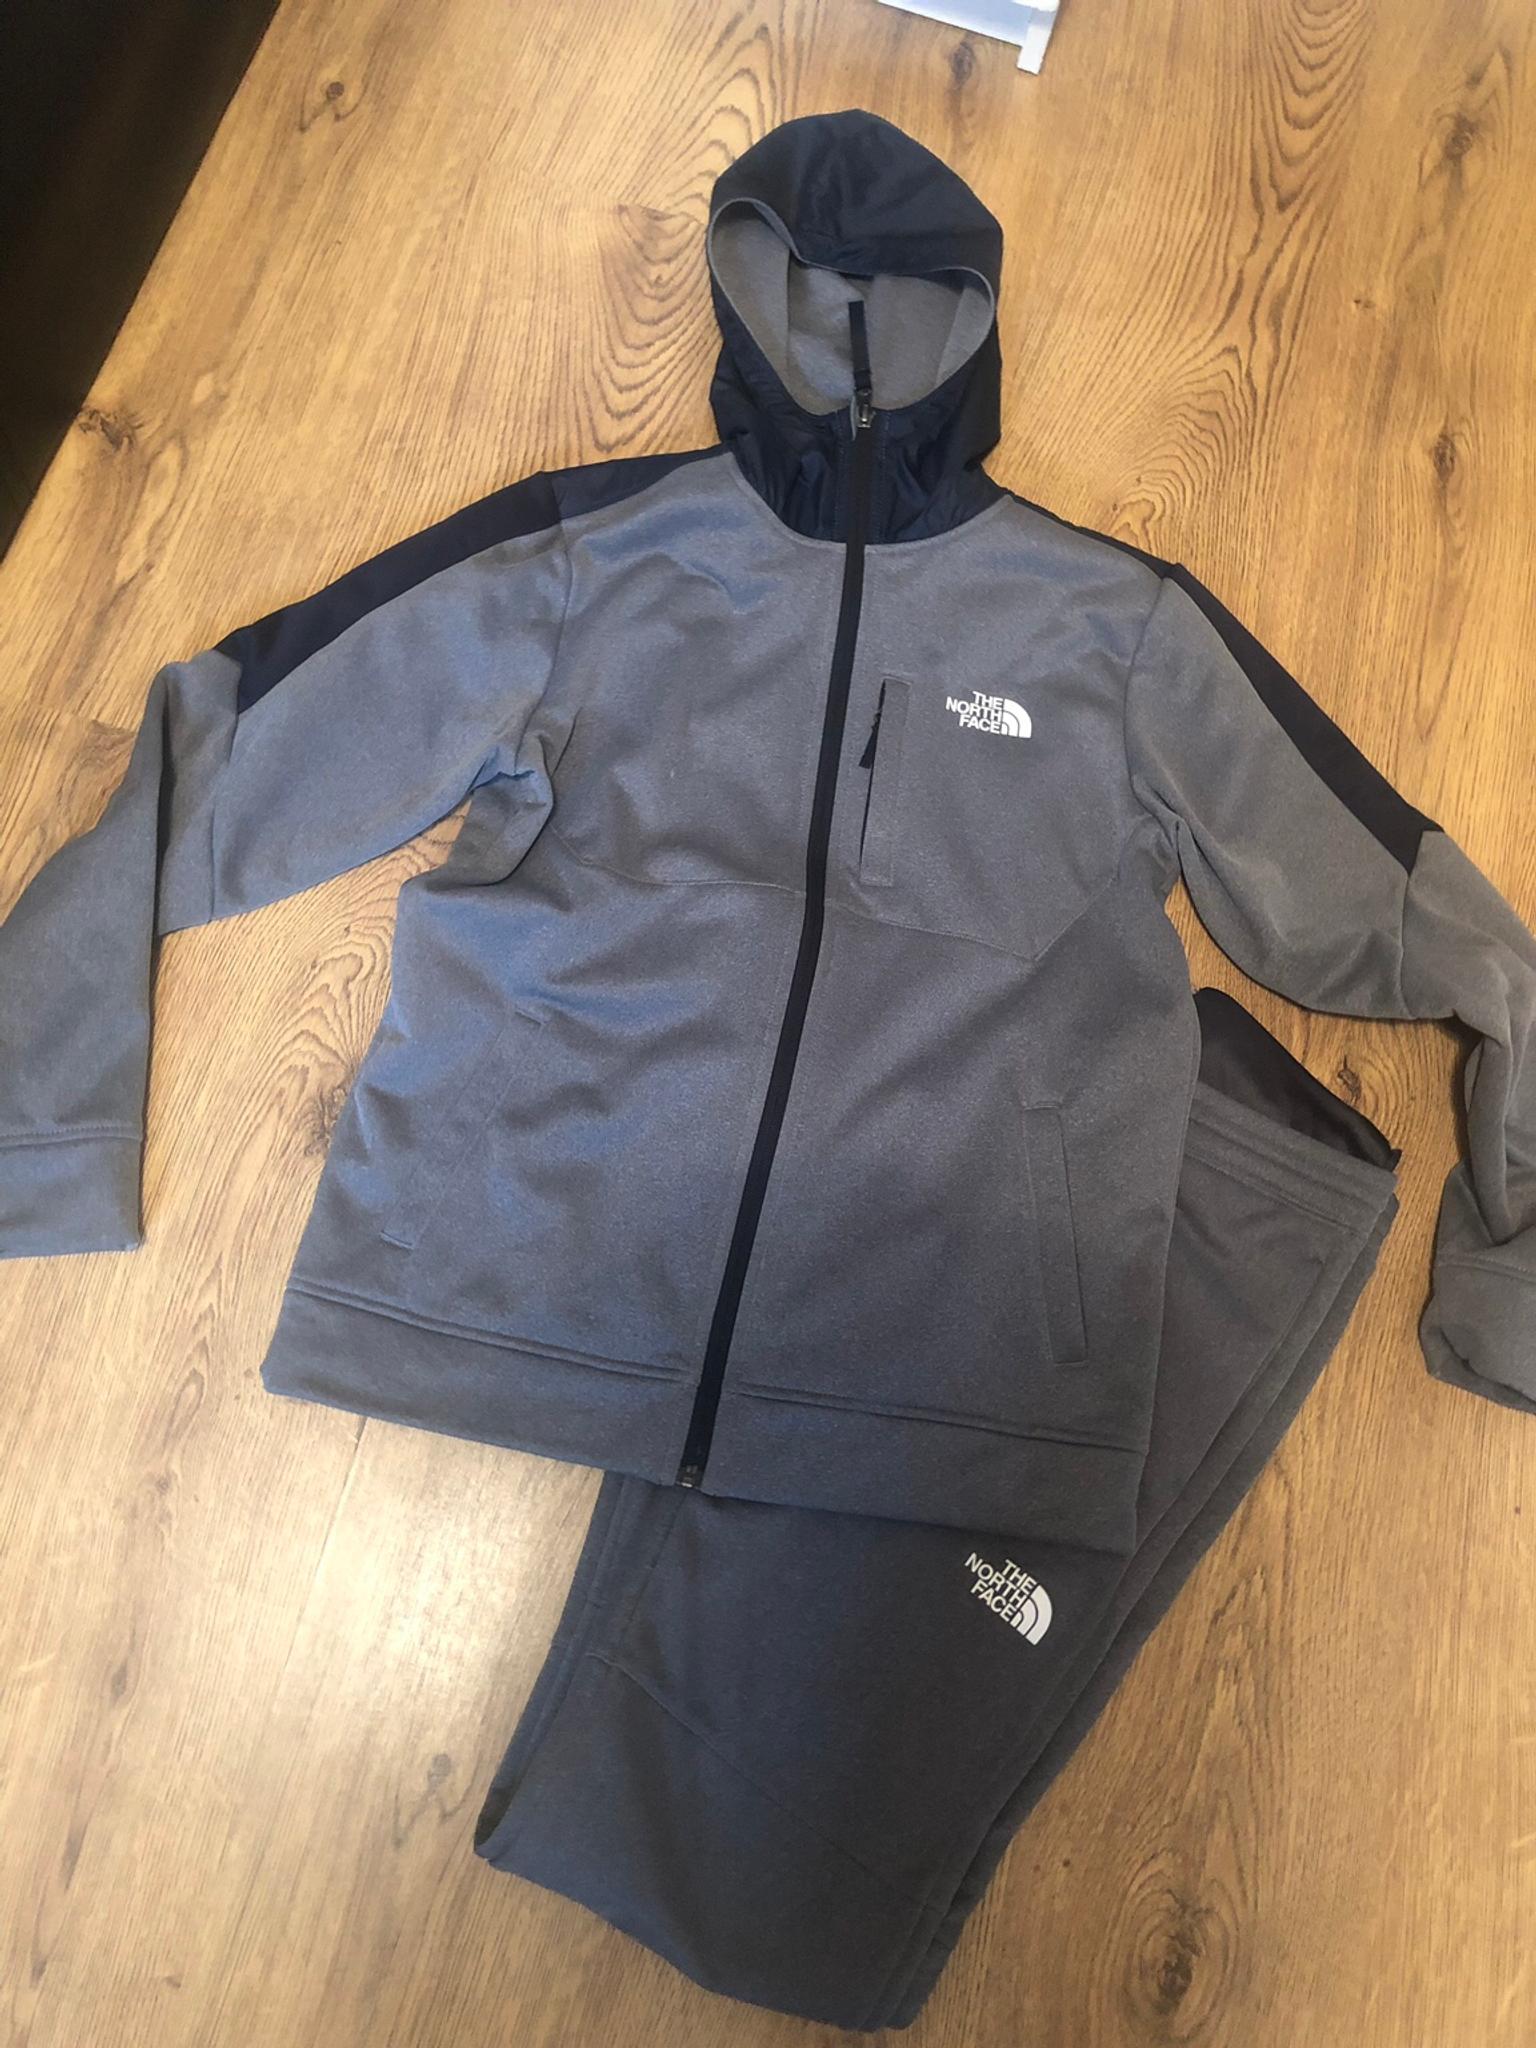 north face boys track suit